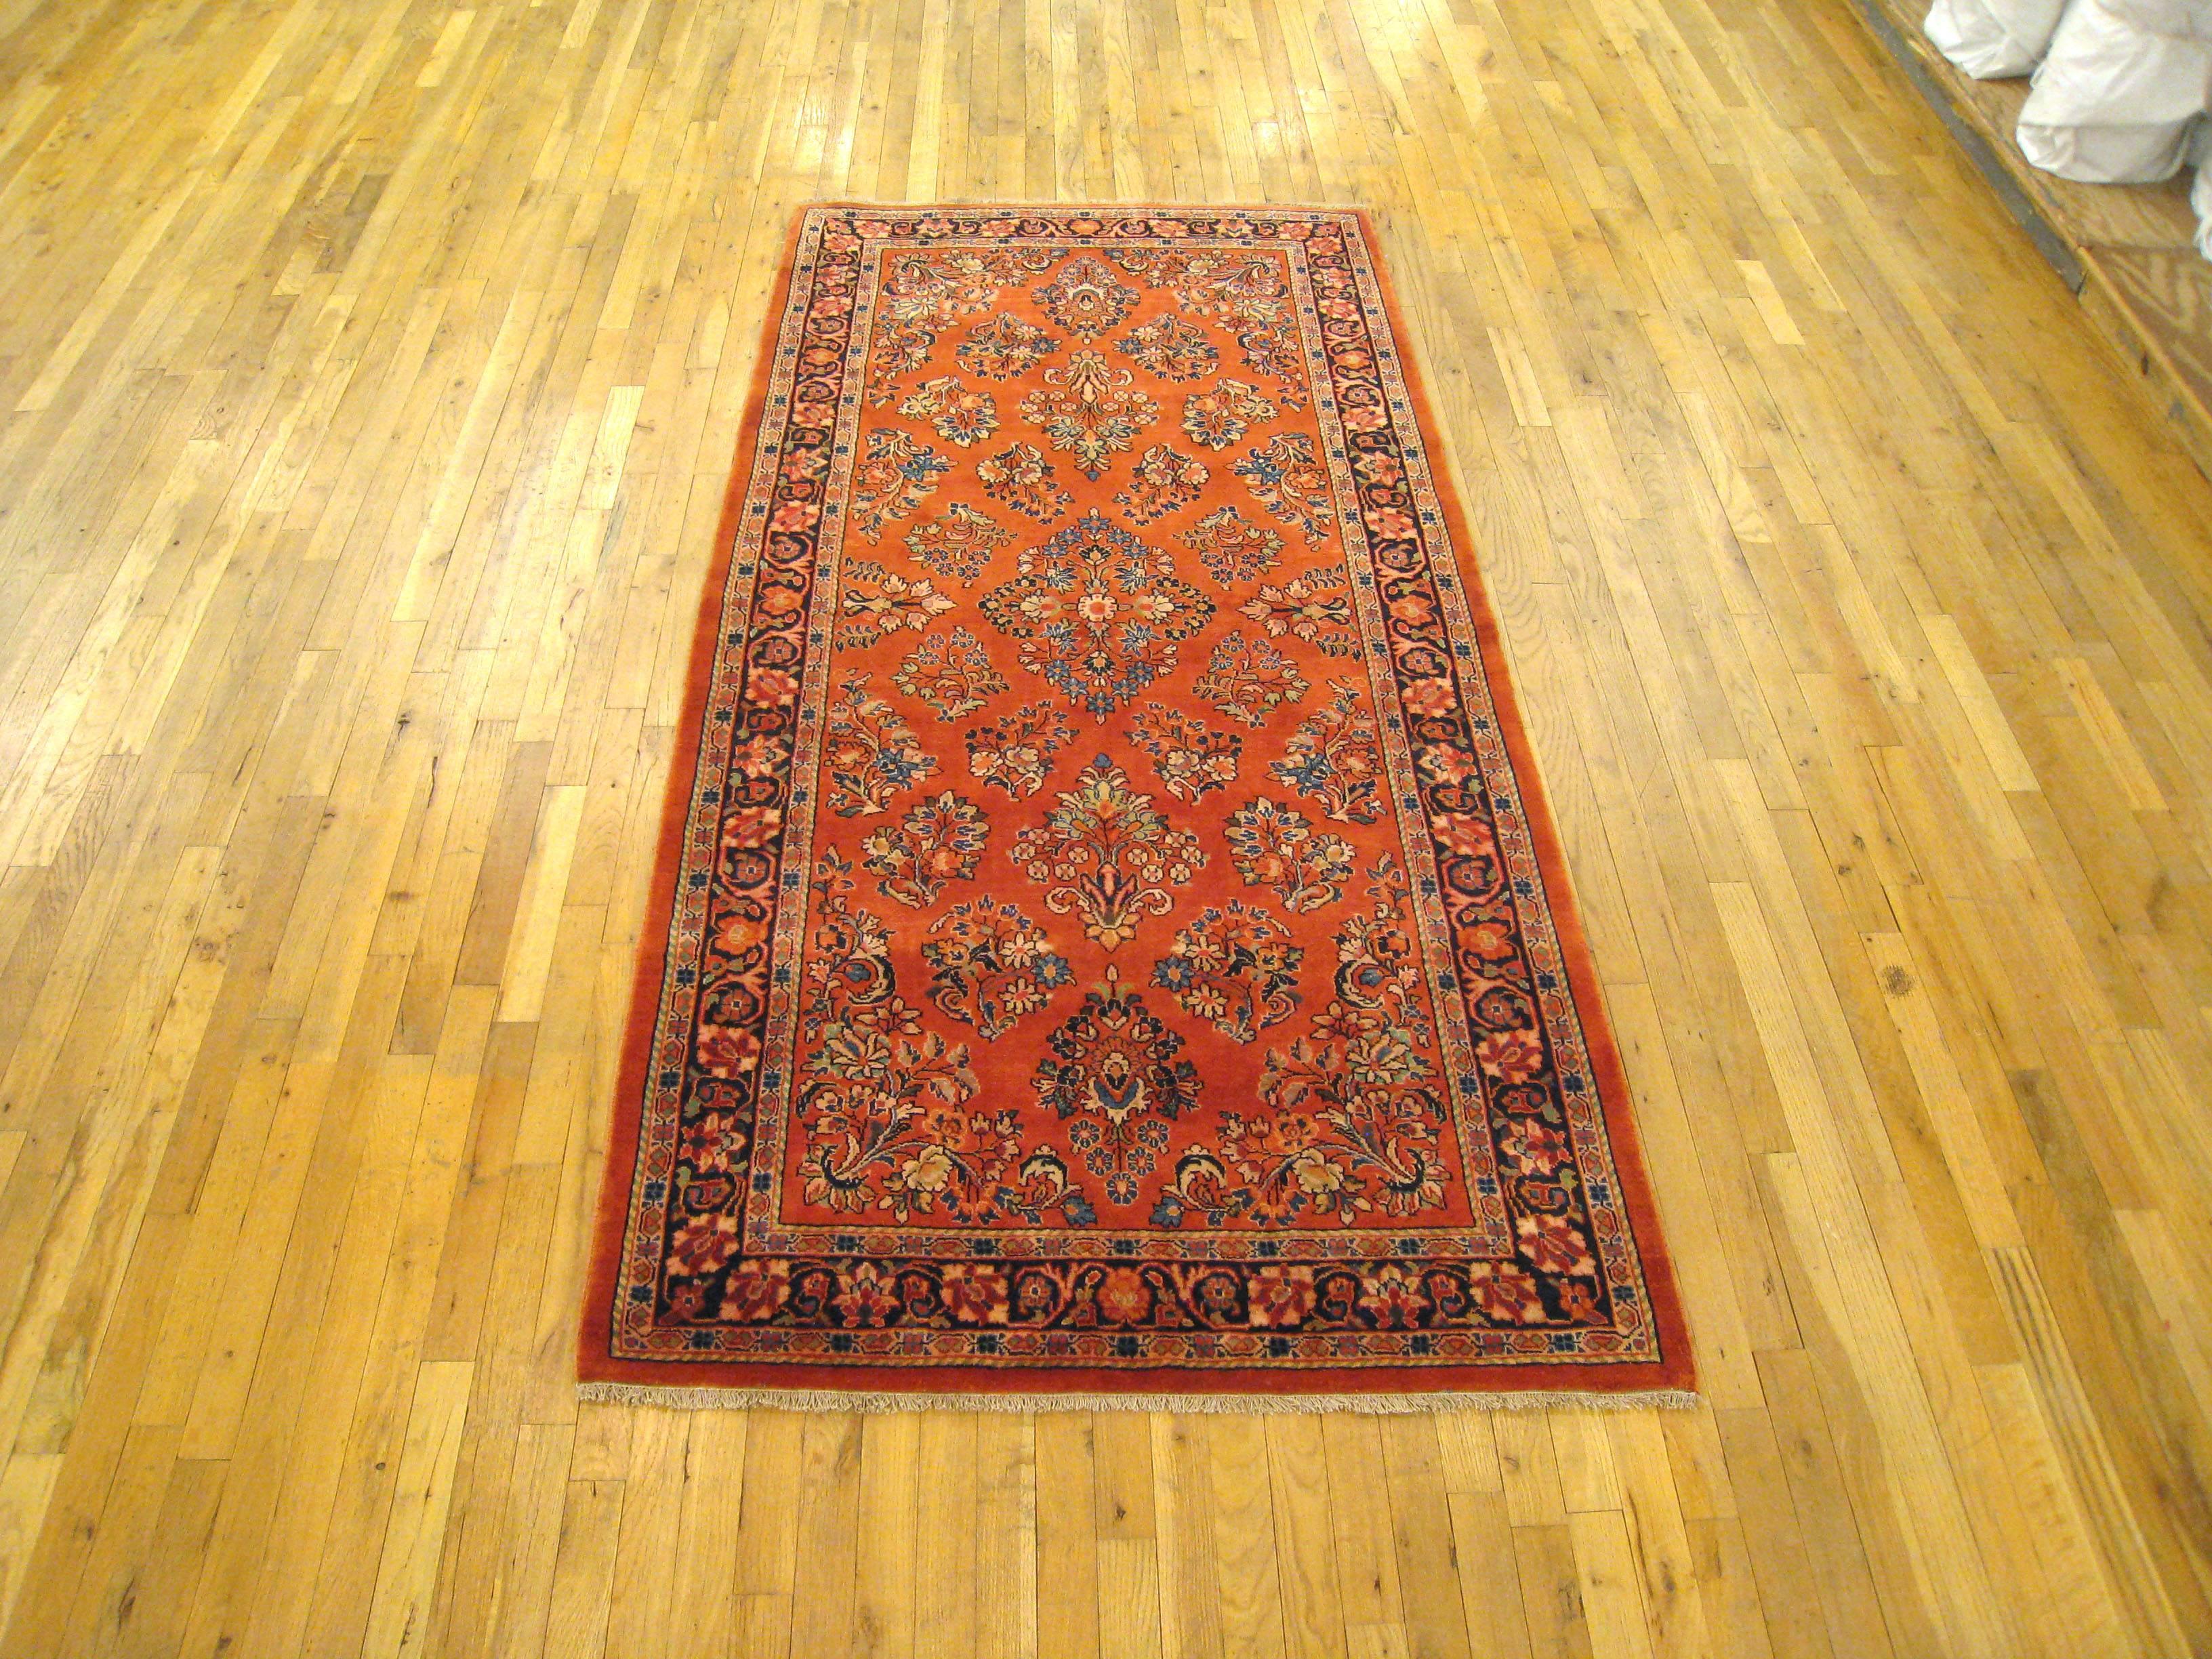 A vintage Persian Sarouk oriental rug, size 7'9 H x 3'9 W, circa 1930.  This lovely hand-woven wool rug features an elegant floral design on a traditional red field with a navy blue border.  This piece is an exemplary classical Persian rug, in